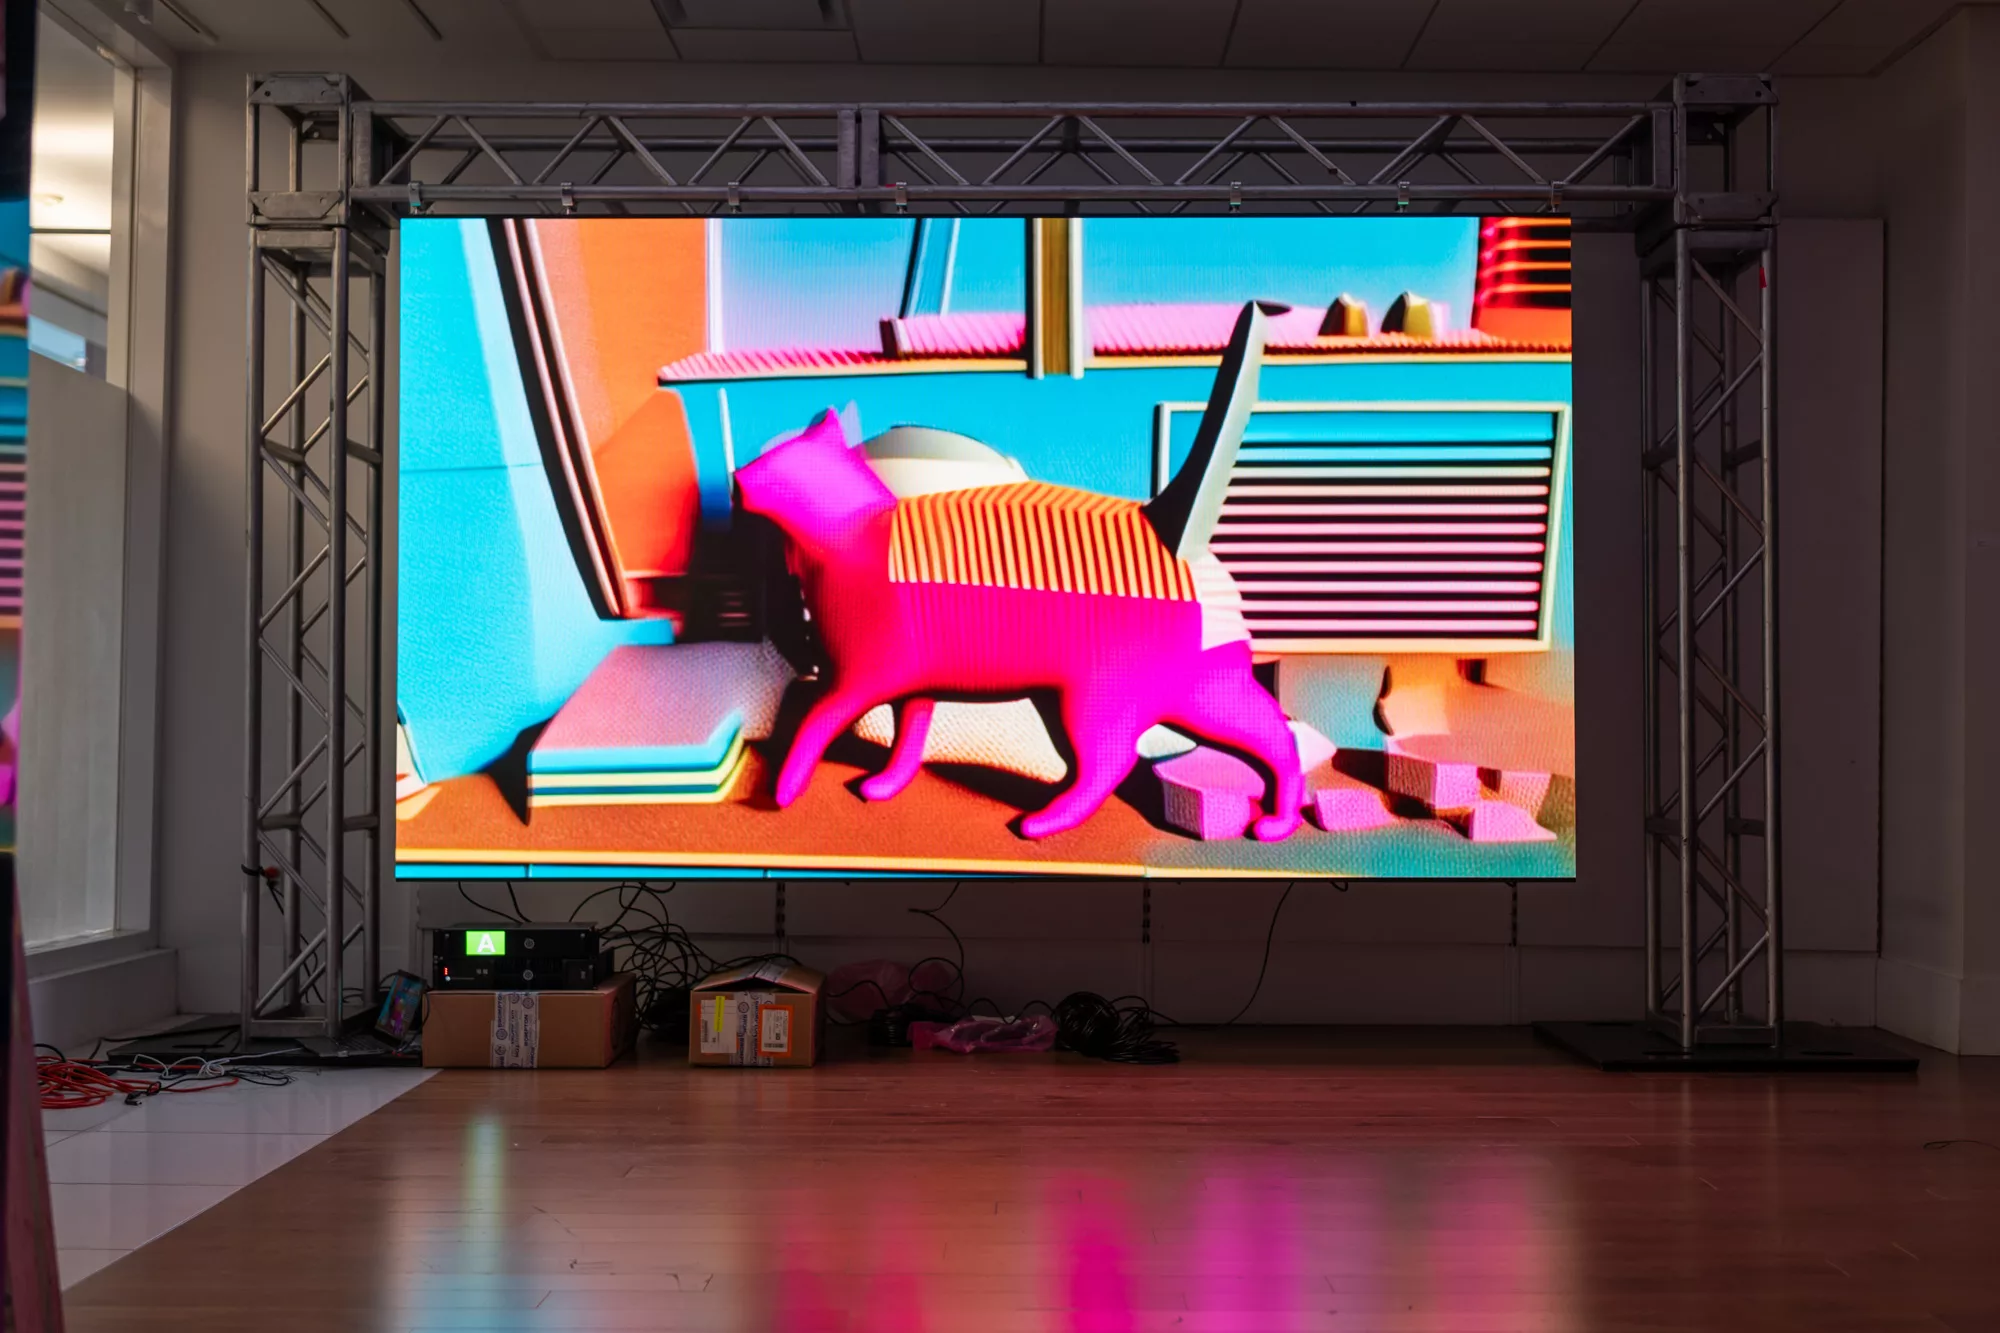 A video wall is hung on a metal trellis. The video is AI driven, brightly colored (primarily pink, orange, and blue) footage of a cat.